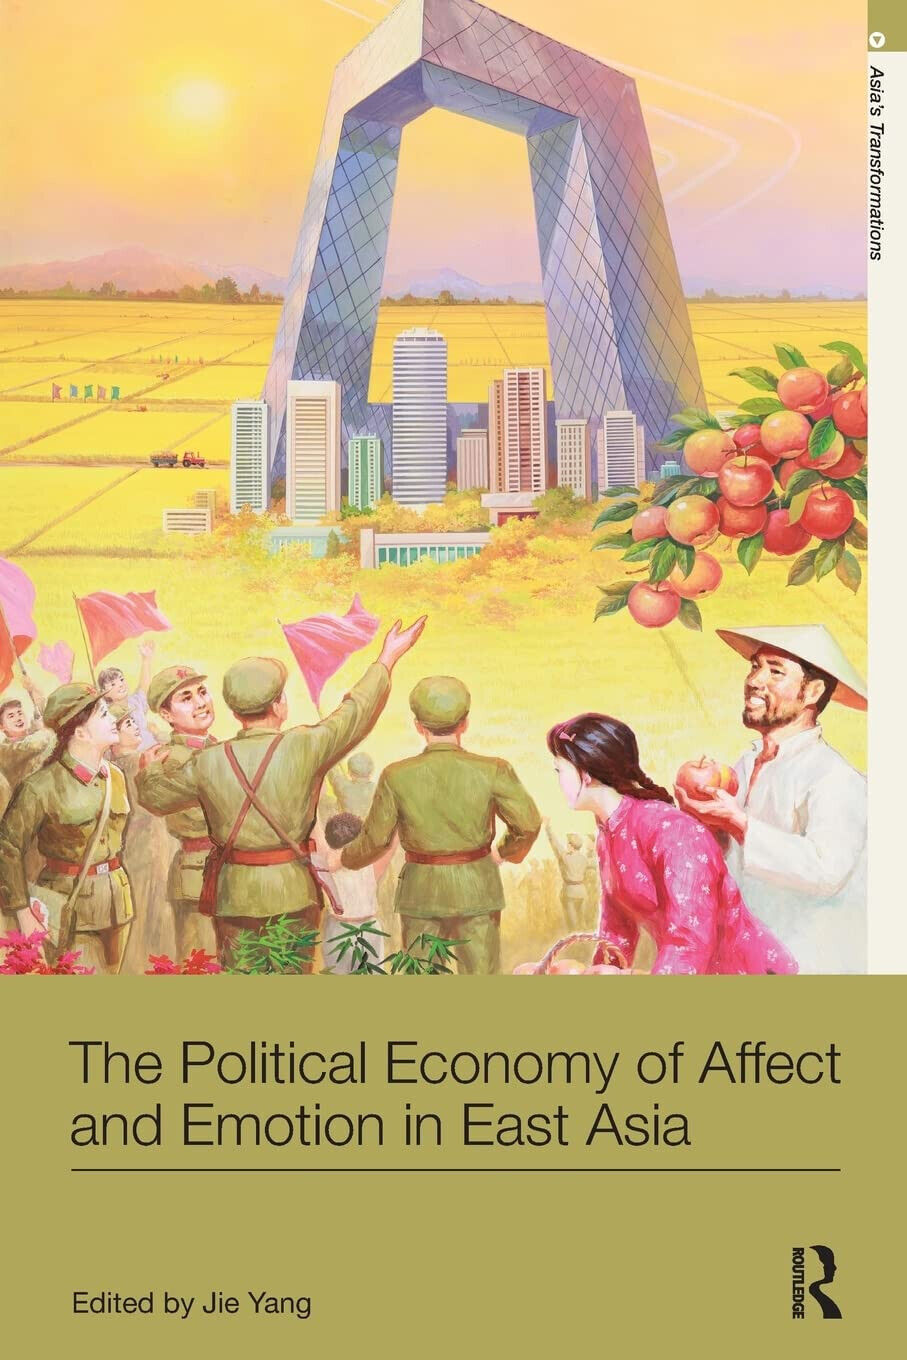 The Political Economy of Affect and Emotion in East Asia - Jie Yang - Routledge